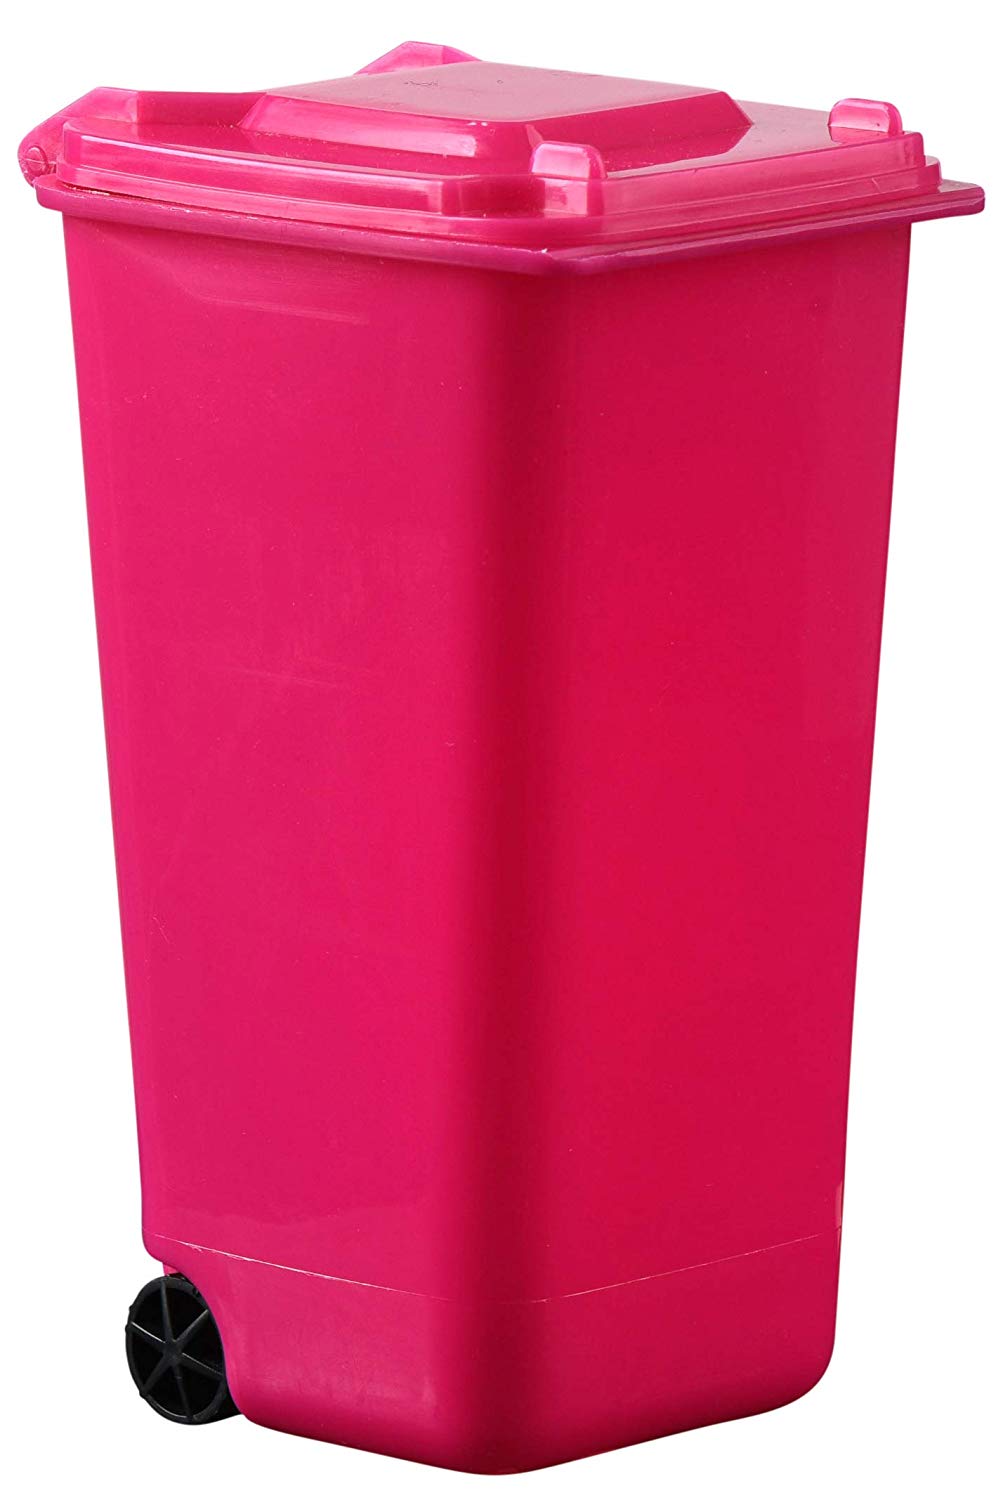 Hammont Plastic Toy Garbage Cans Playset (6 Pack) used for Pencil Holder, Desktop Organizer, Fun Playing, Novelty and Party Favors Red 6 x 3 x 6 (Pink)